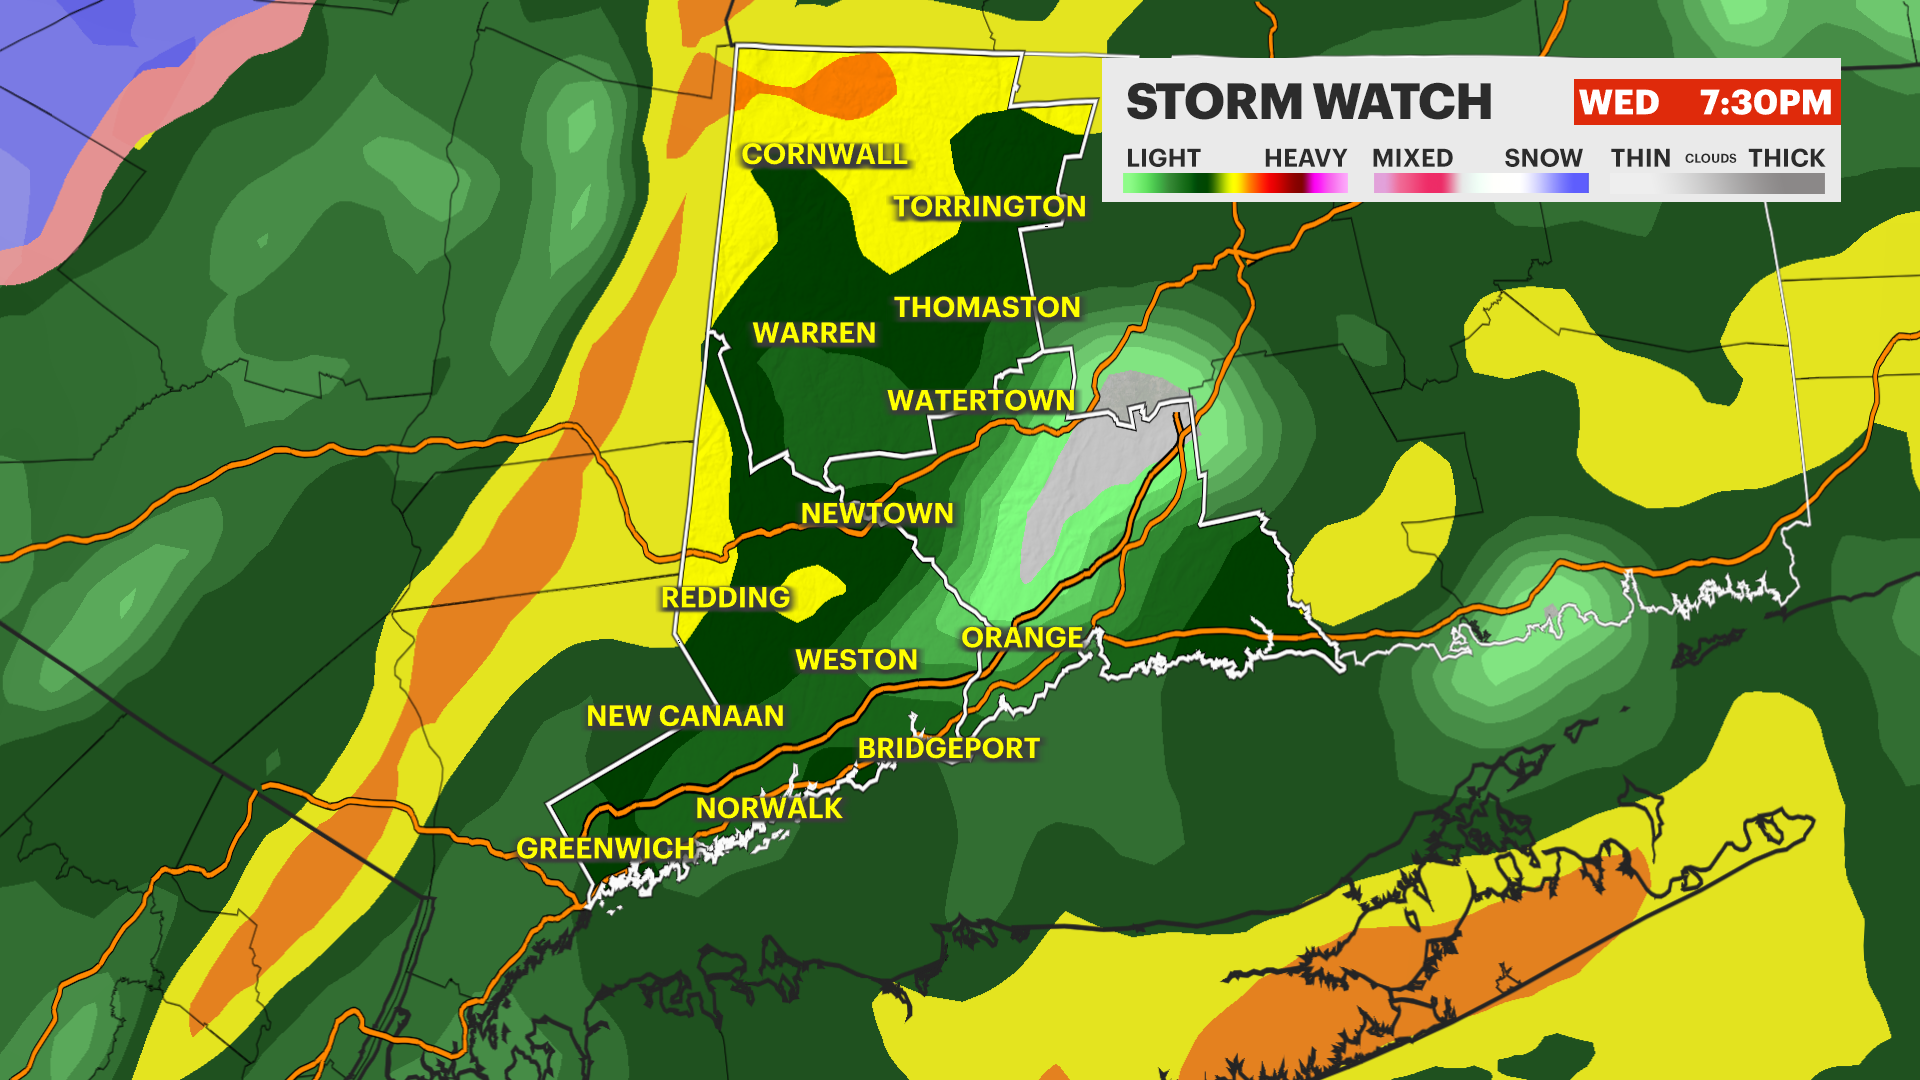 STORM WATCH: Tracking heavy rain and thunderstorms today in Connecticut